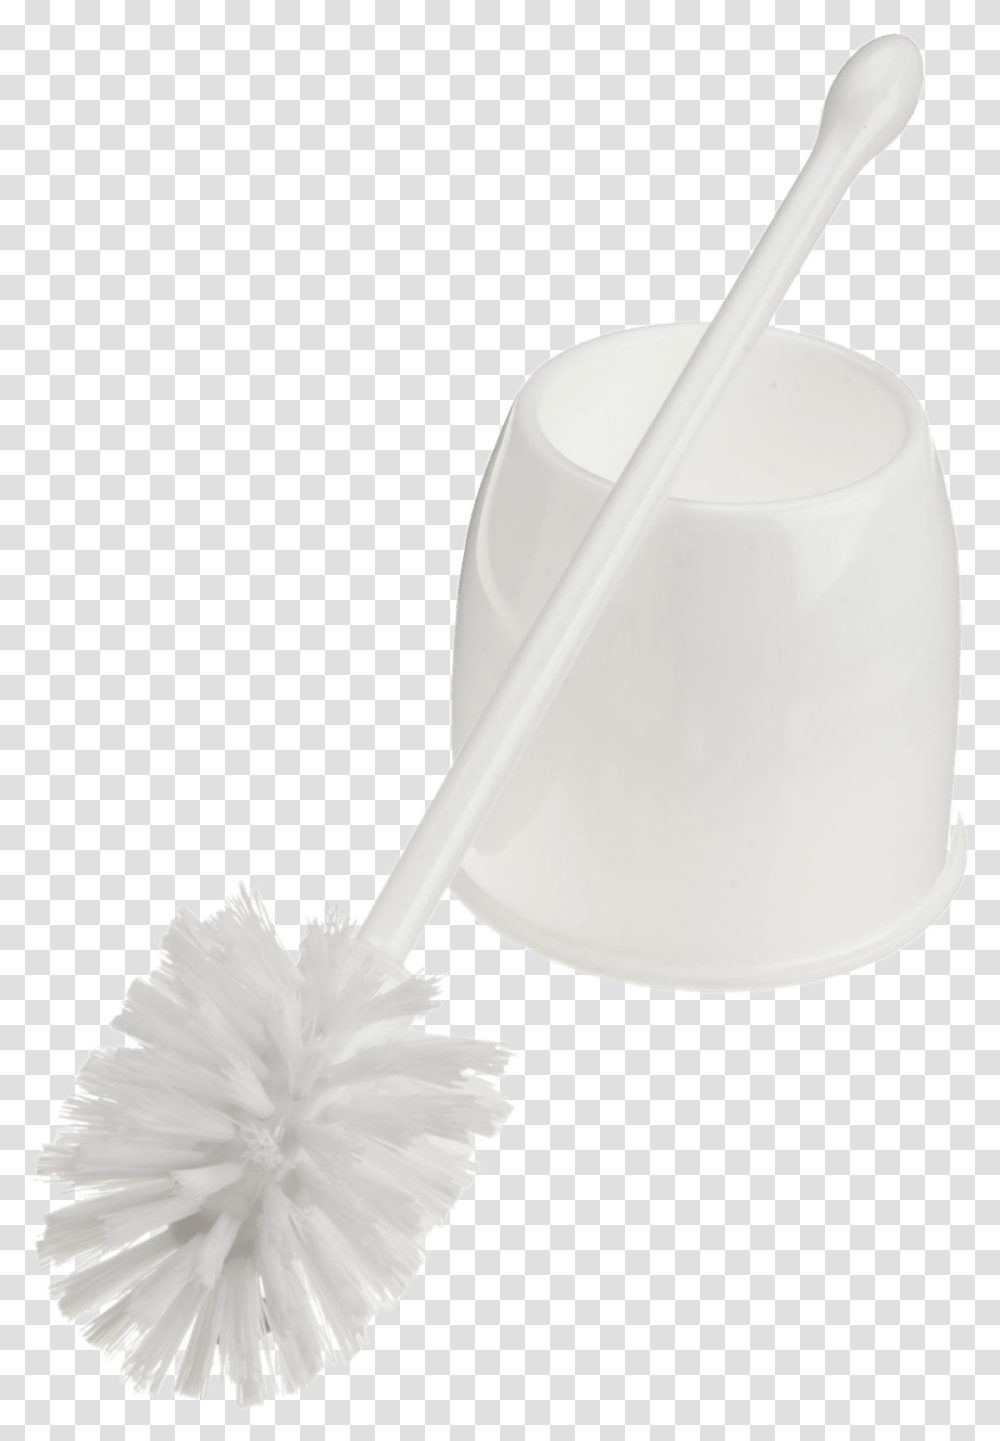 Toilet Brush White Toilet Brush Background, Tool, Toothbrush, Spoon, Cutlery Transparent Png